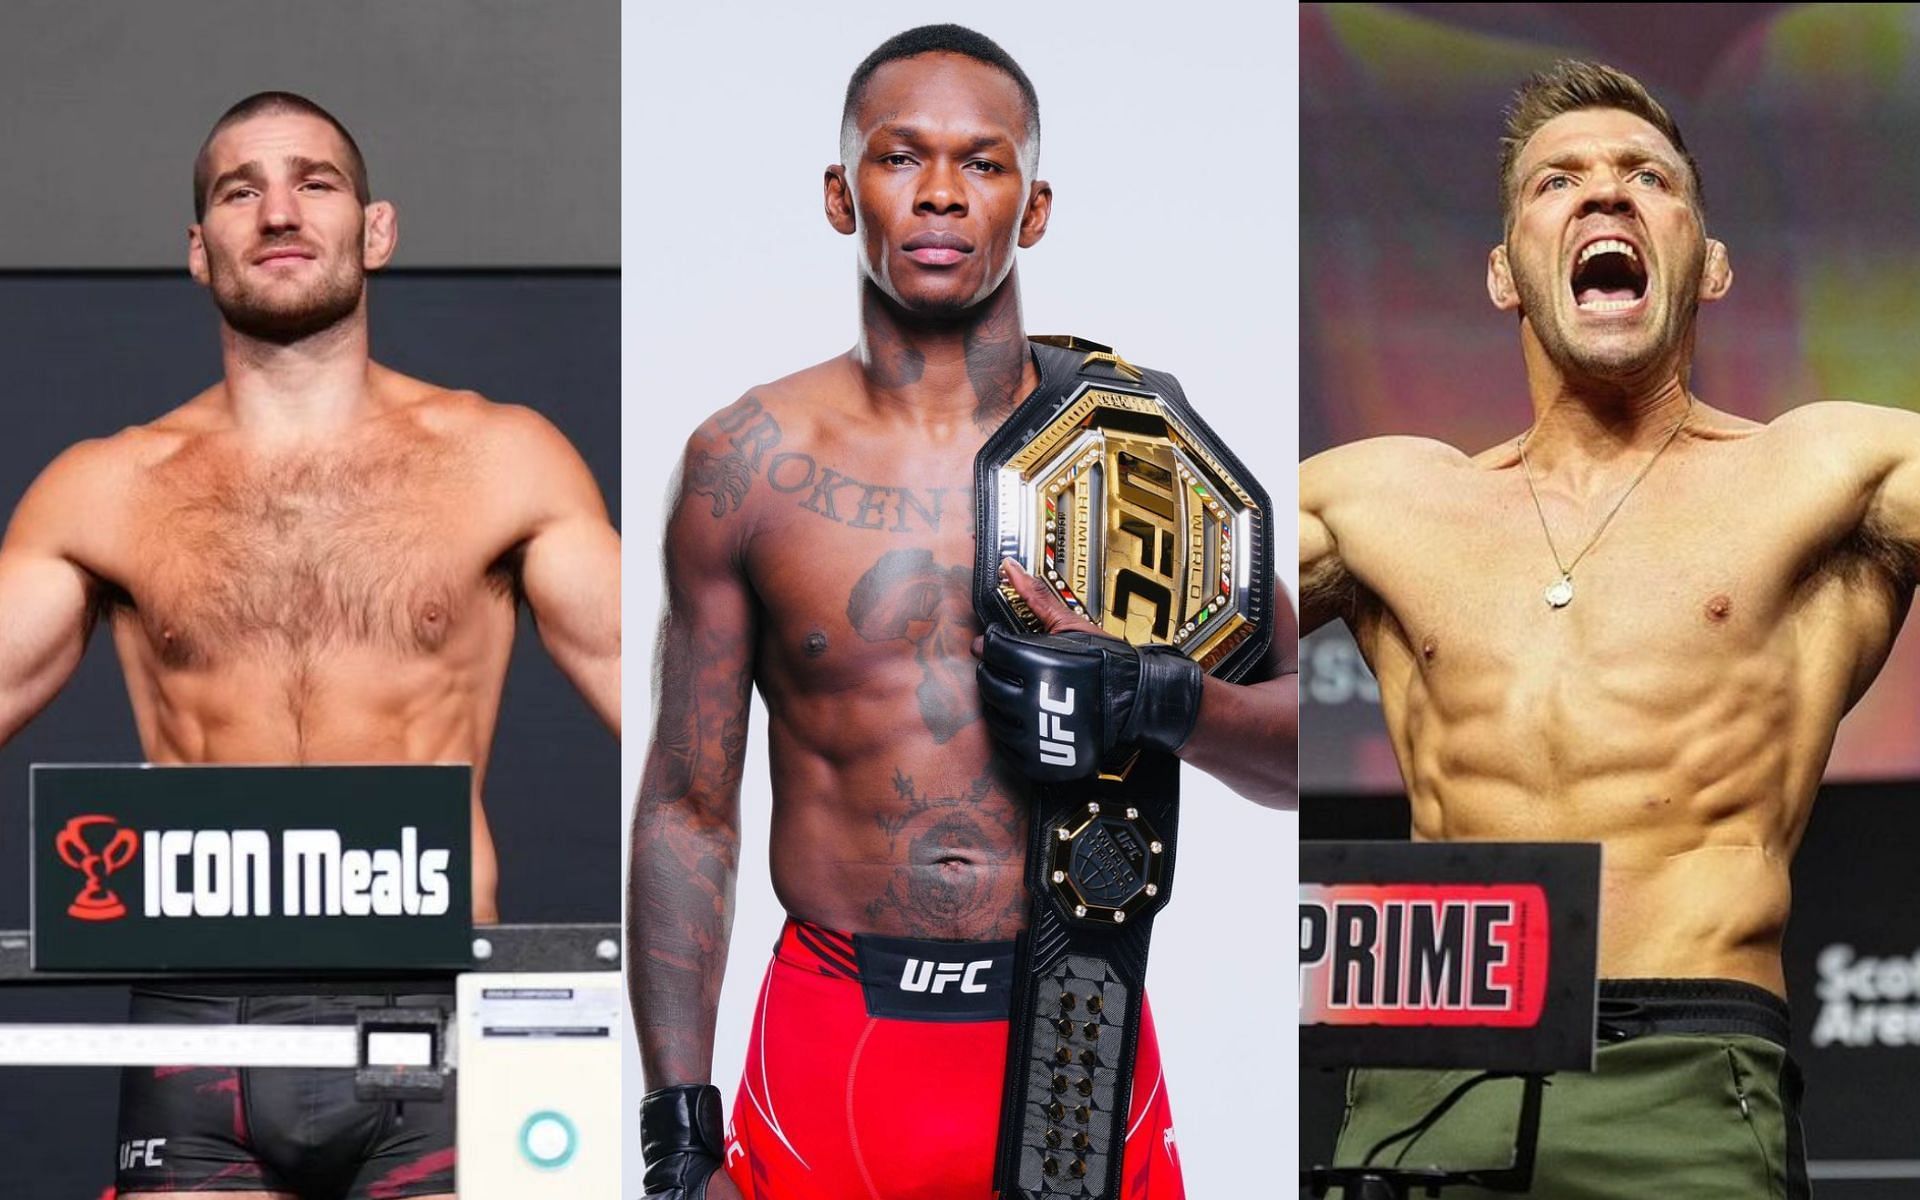 Israel Adesanya (center) details plans to rematch Sean Strickland (left) and face Dricus du Plessis (right) [Photo Courtesy @stylebender, @stricklandmma and @dricusduplessis on Instagram]